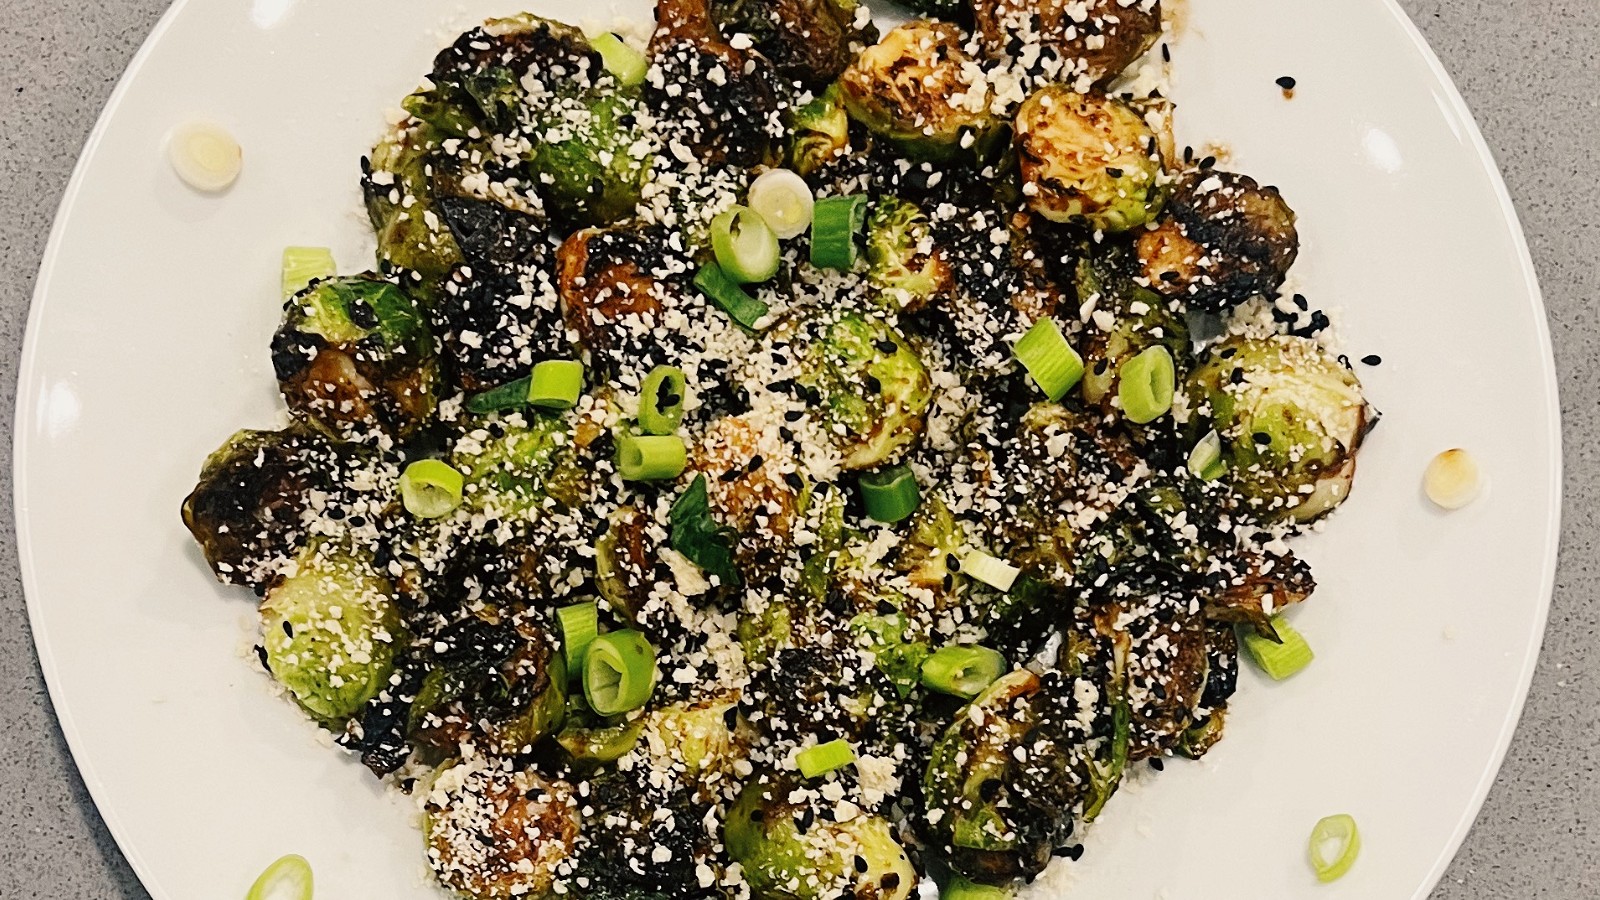 Image of Miso-Sesame Brussel Sprouts with Crispy Panko Topping